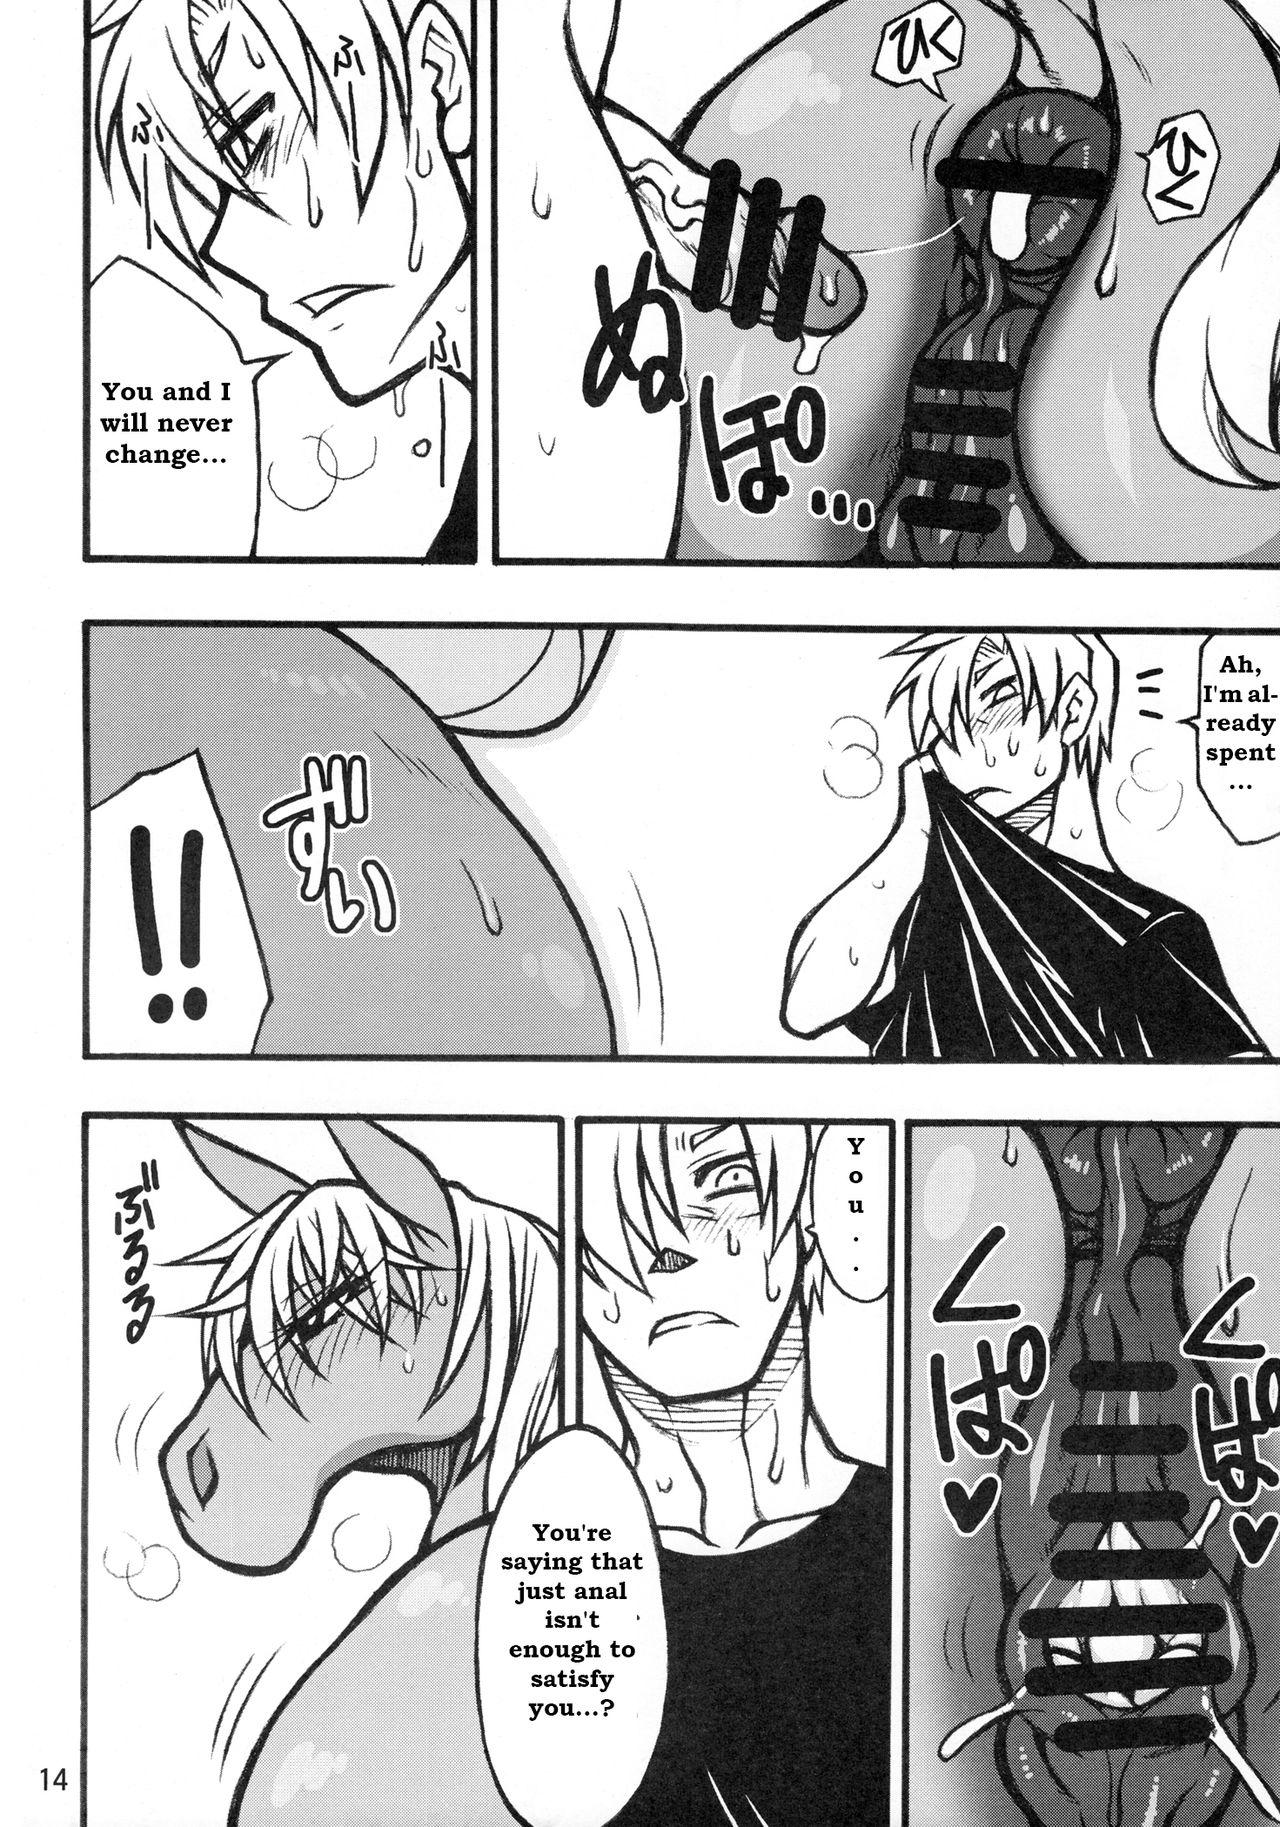 Topless Mare Holic 2 Kemolover Ch 1, 2, 8, 13, 16 Punished - Page 9